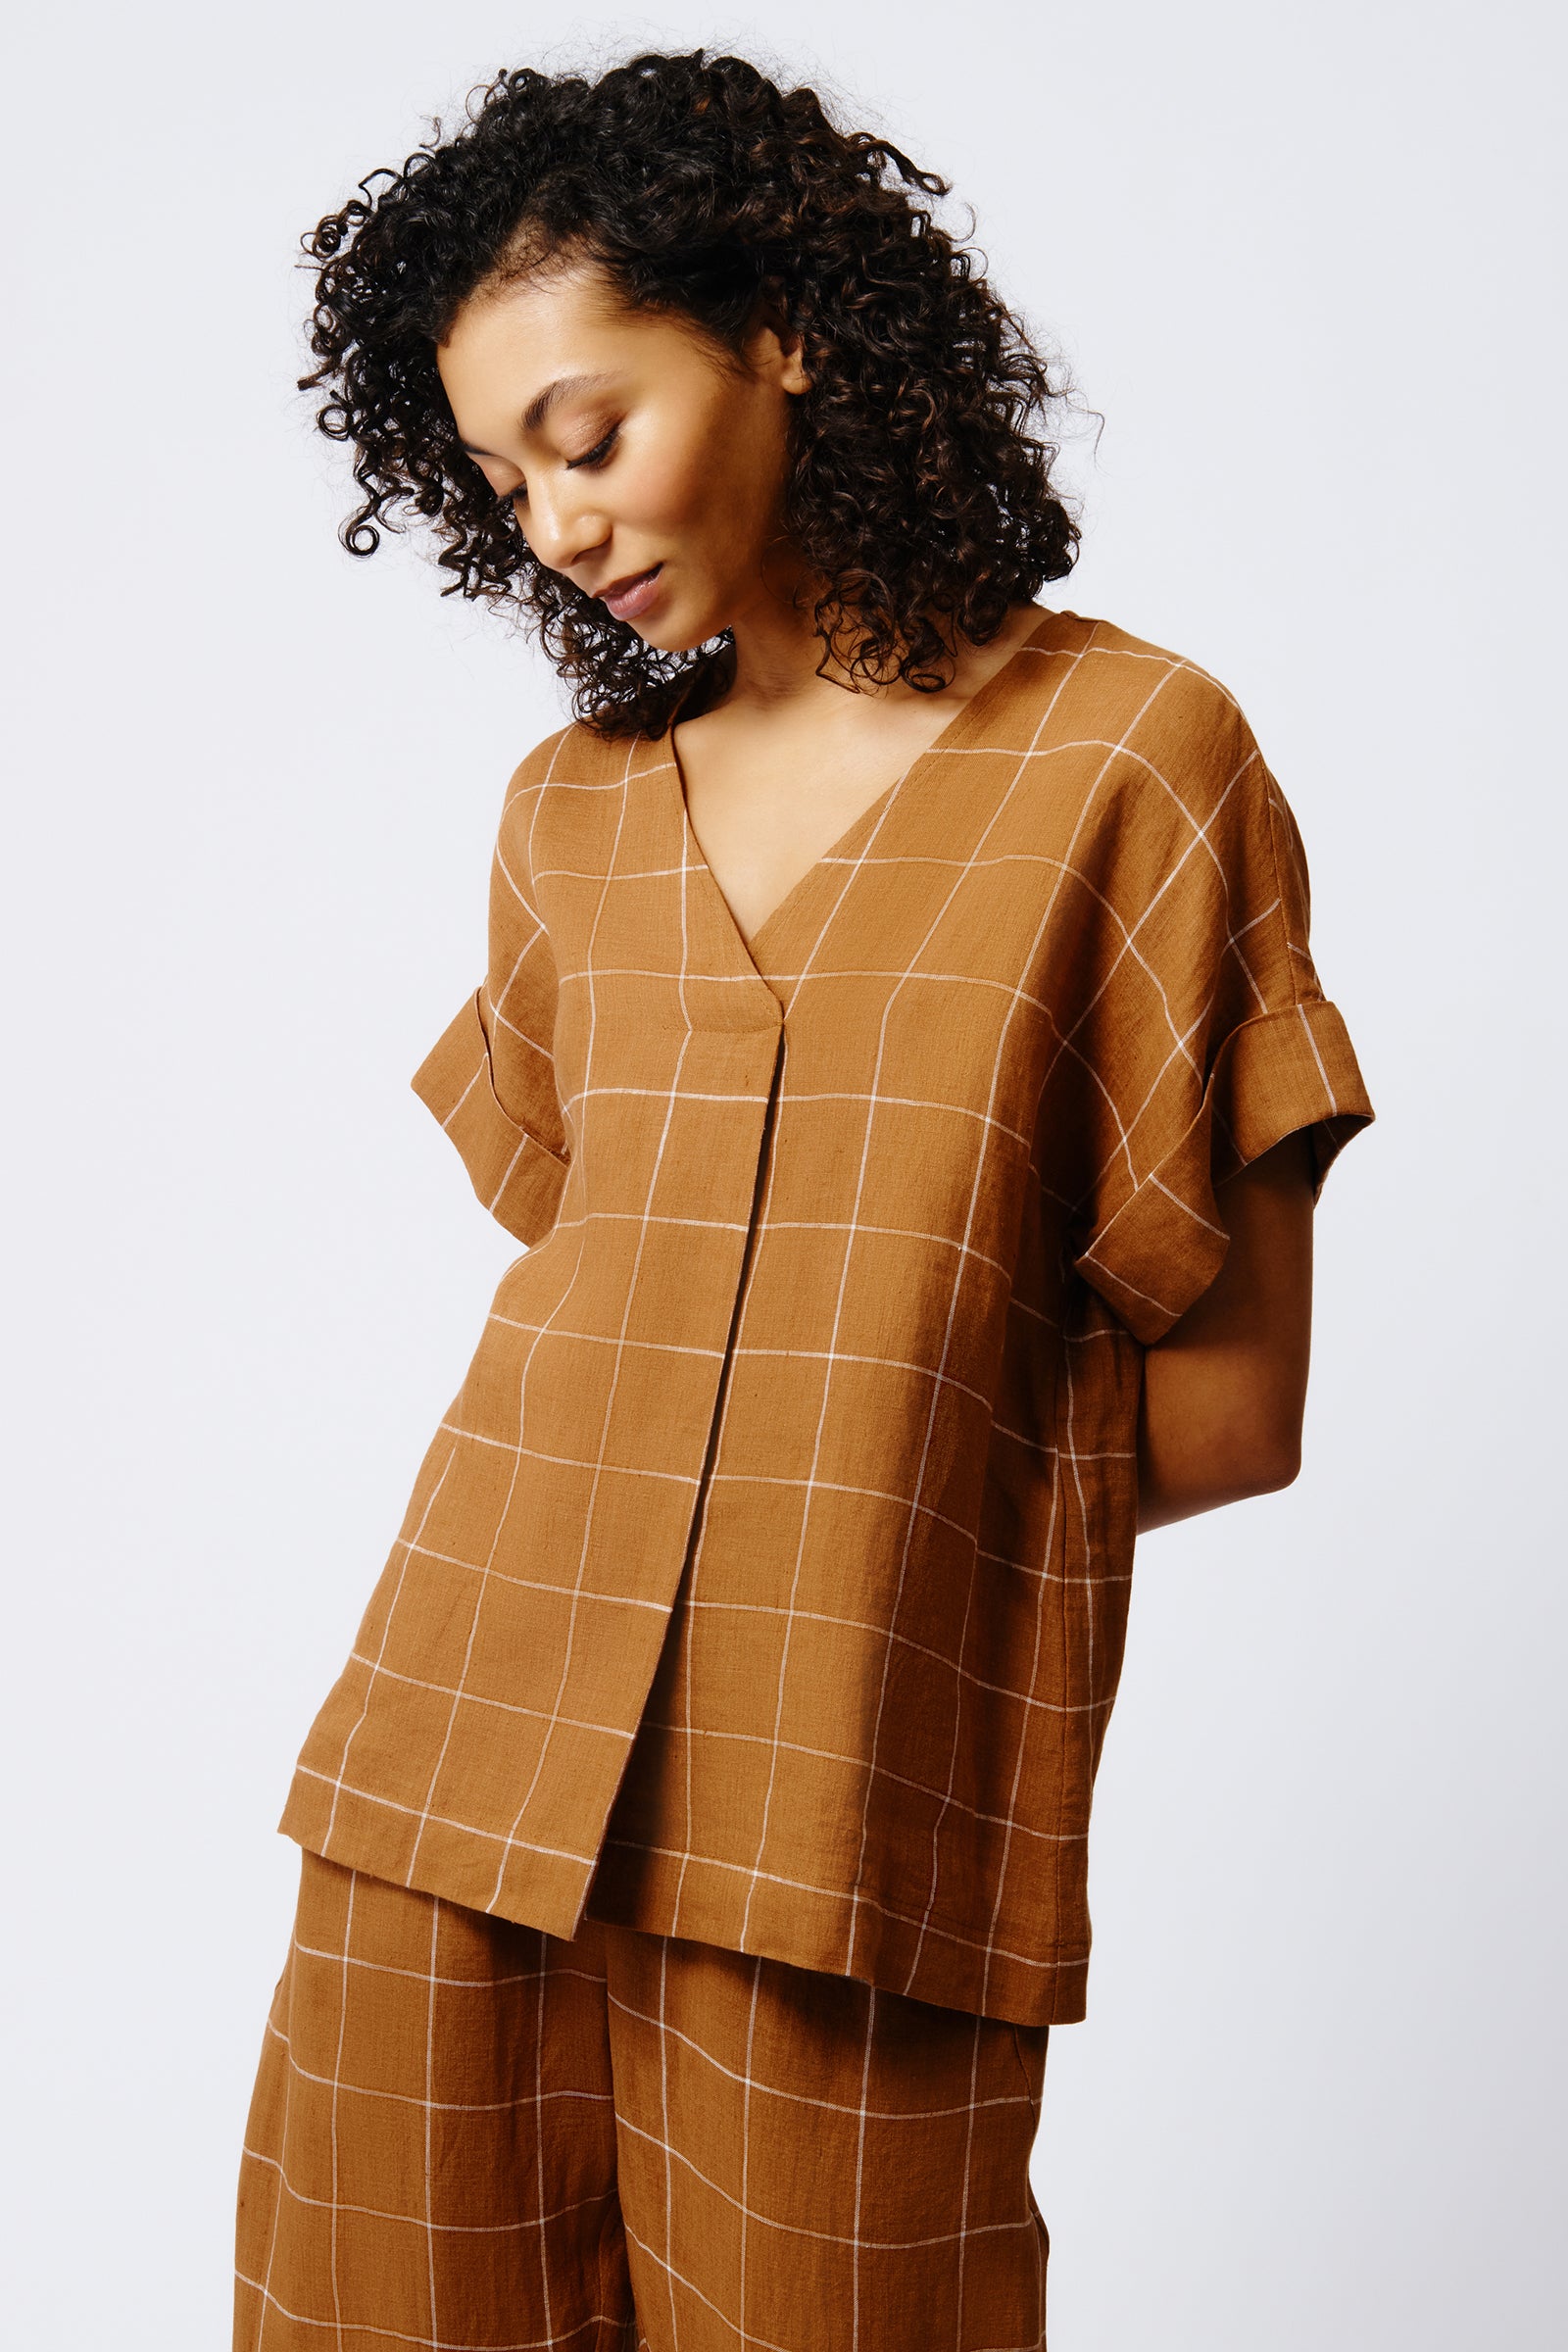 Kal Rieman Audrey Fold Front Kimono Top in Rust Windowpane on Model Front View Crop 3